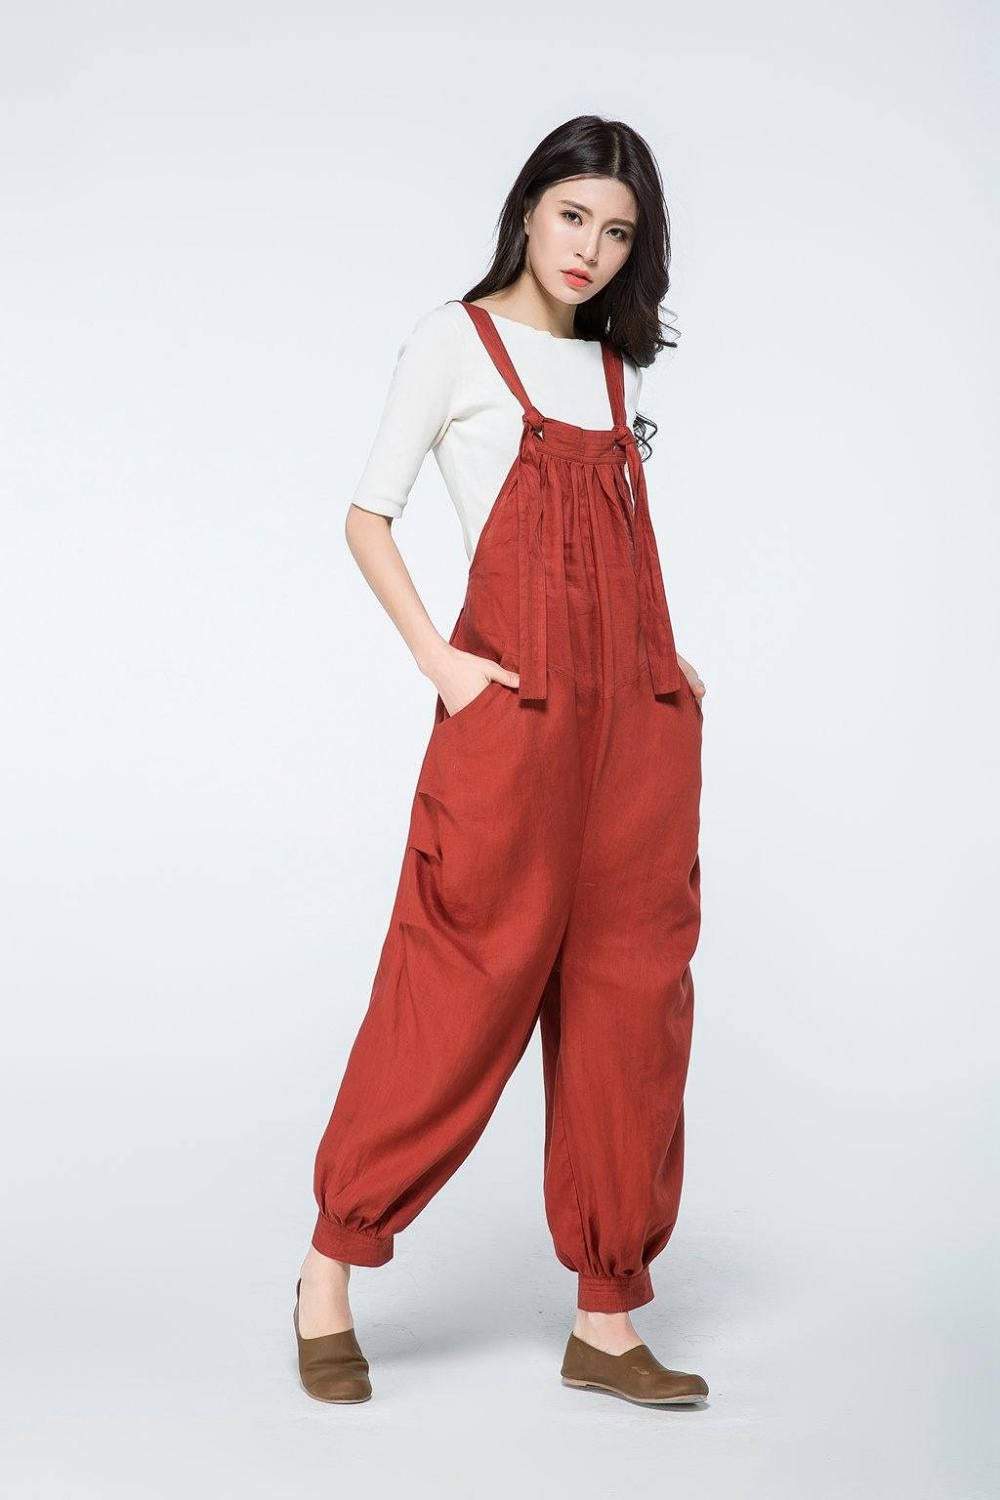 Aggregate 159+ loose fitting jumpsuit latest